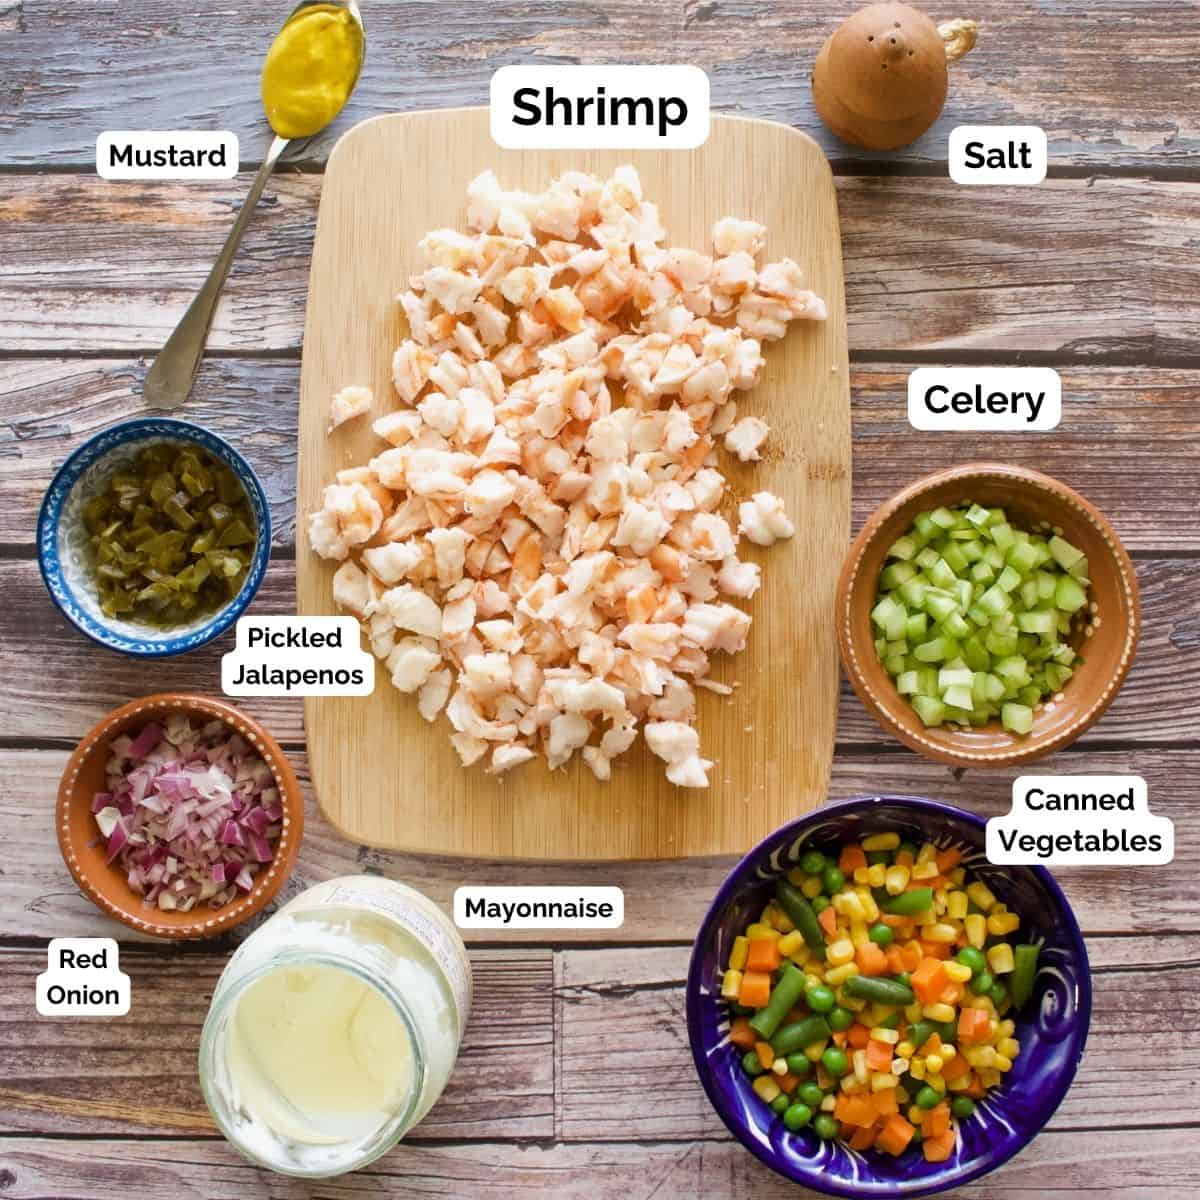 The ingredients needed to make the shrimp salad labeled and sitting on a wooden table.